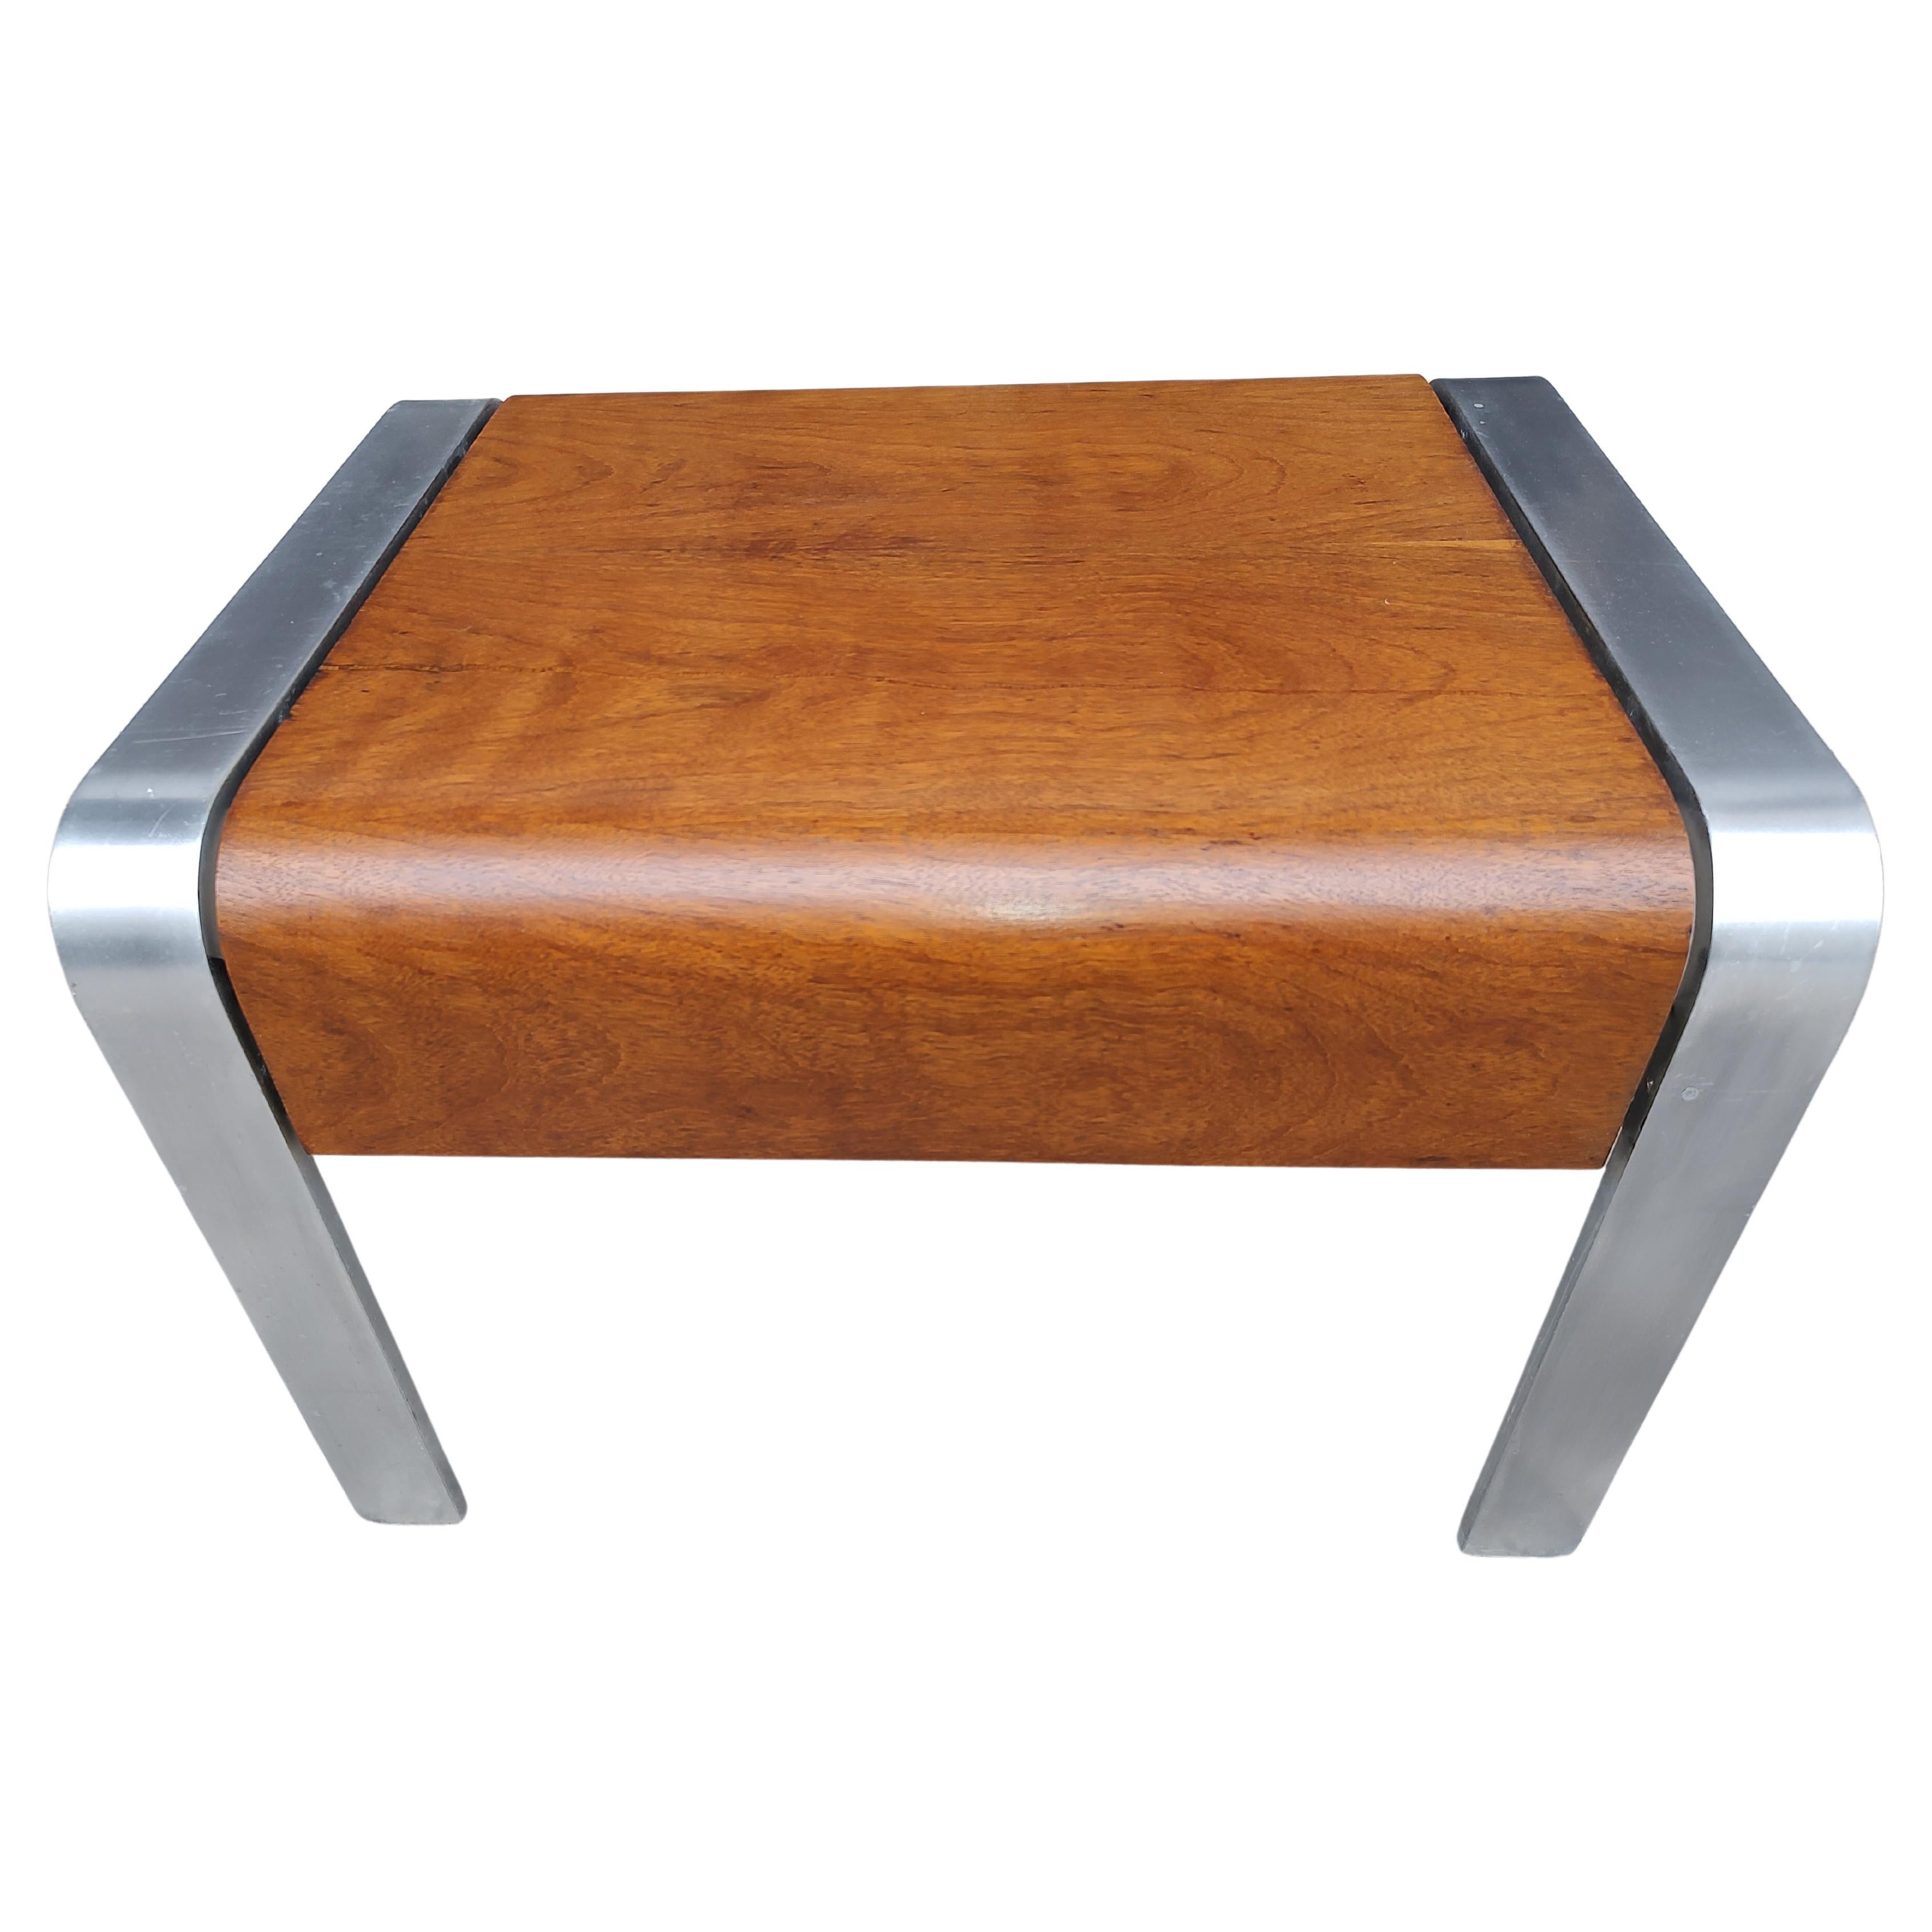 Hand-Crafted Modernist Aluminum Side Table with a Exotic Bent Wood Table Top For Sale